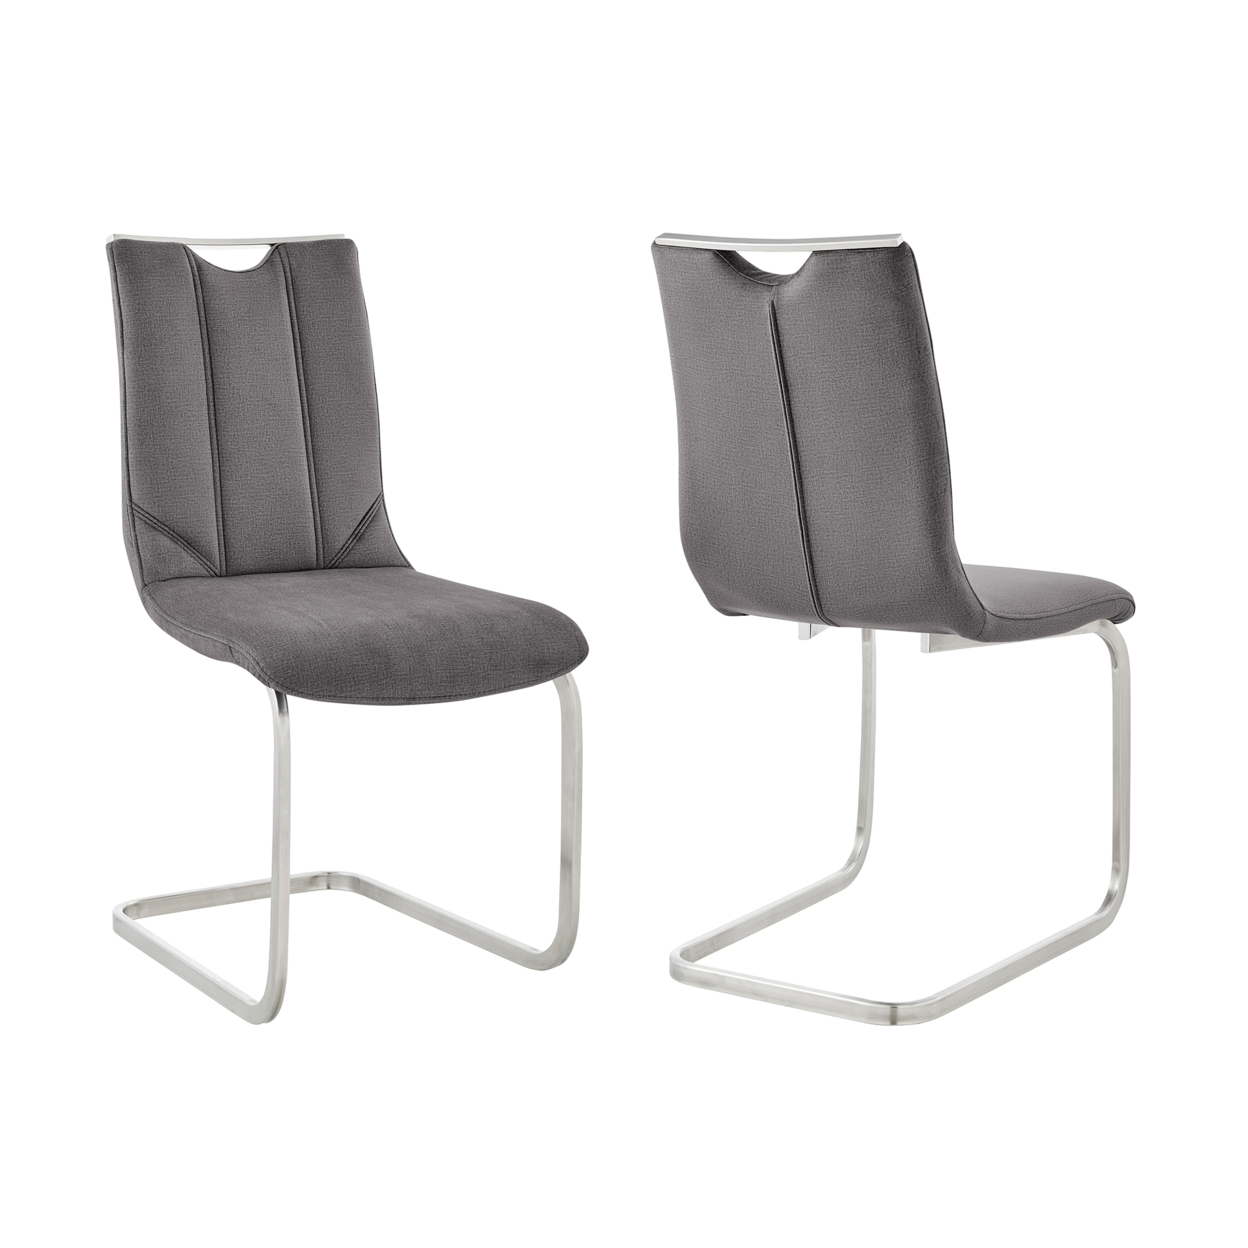 Dining Chair With Metal Cantilever Base, Set Of 2, Gray And Silver - Saltoro Sherpi